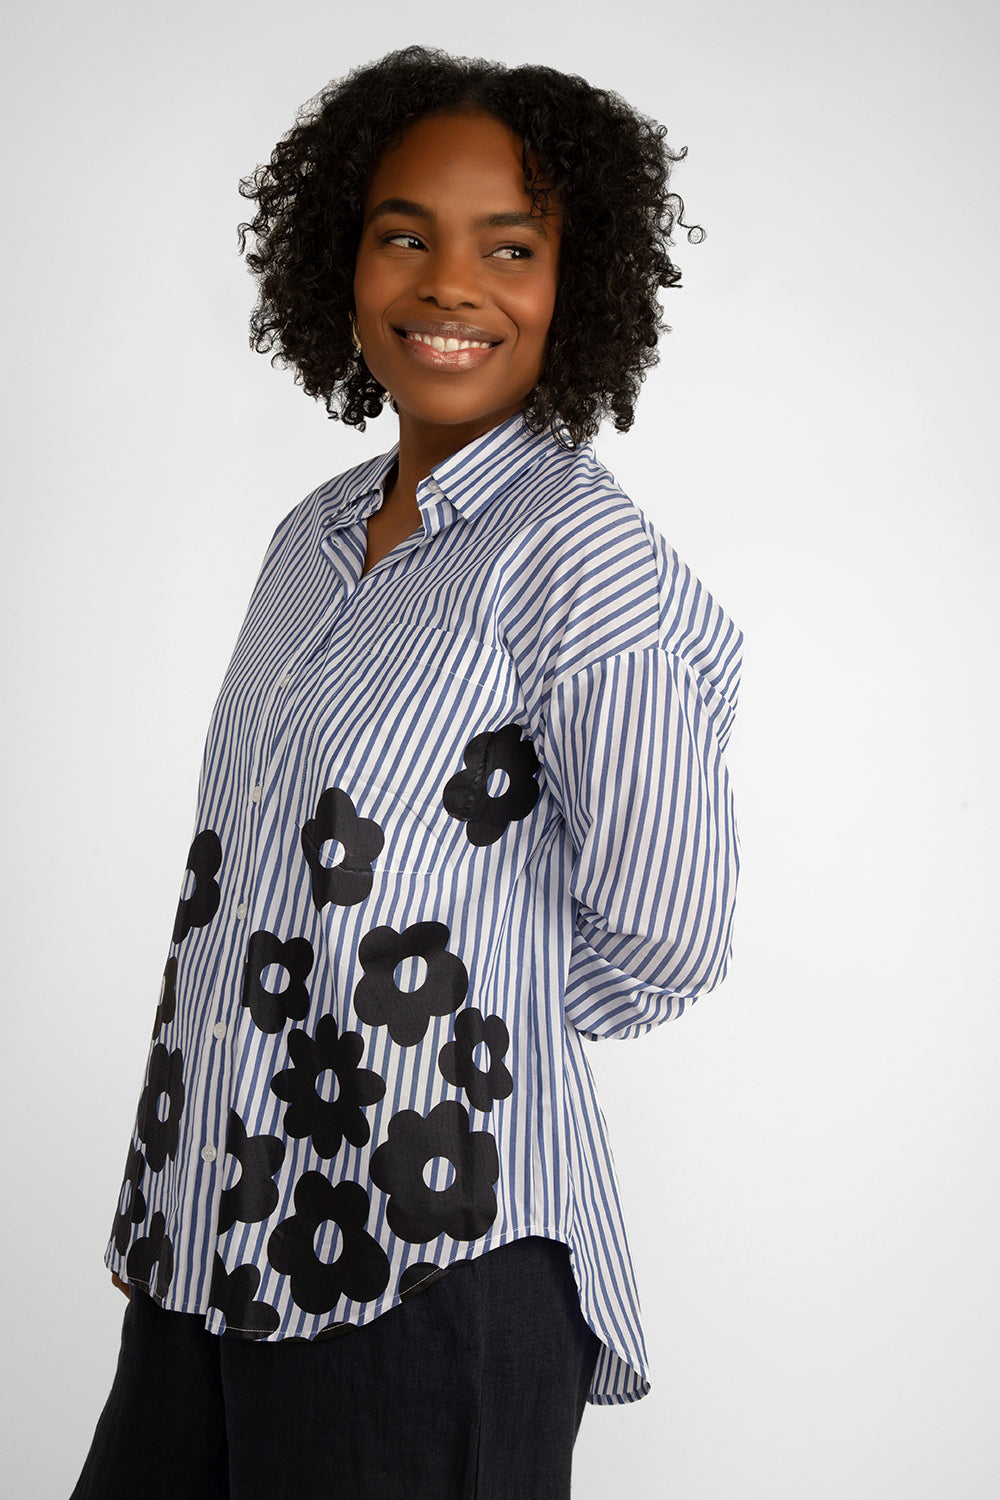 Carre Noir (6866) Women's Long Sleeve Blue & White Striped Button Up Shirt With Black Flowers along the front hem and lower half of the top